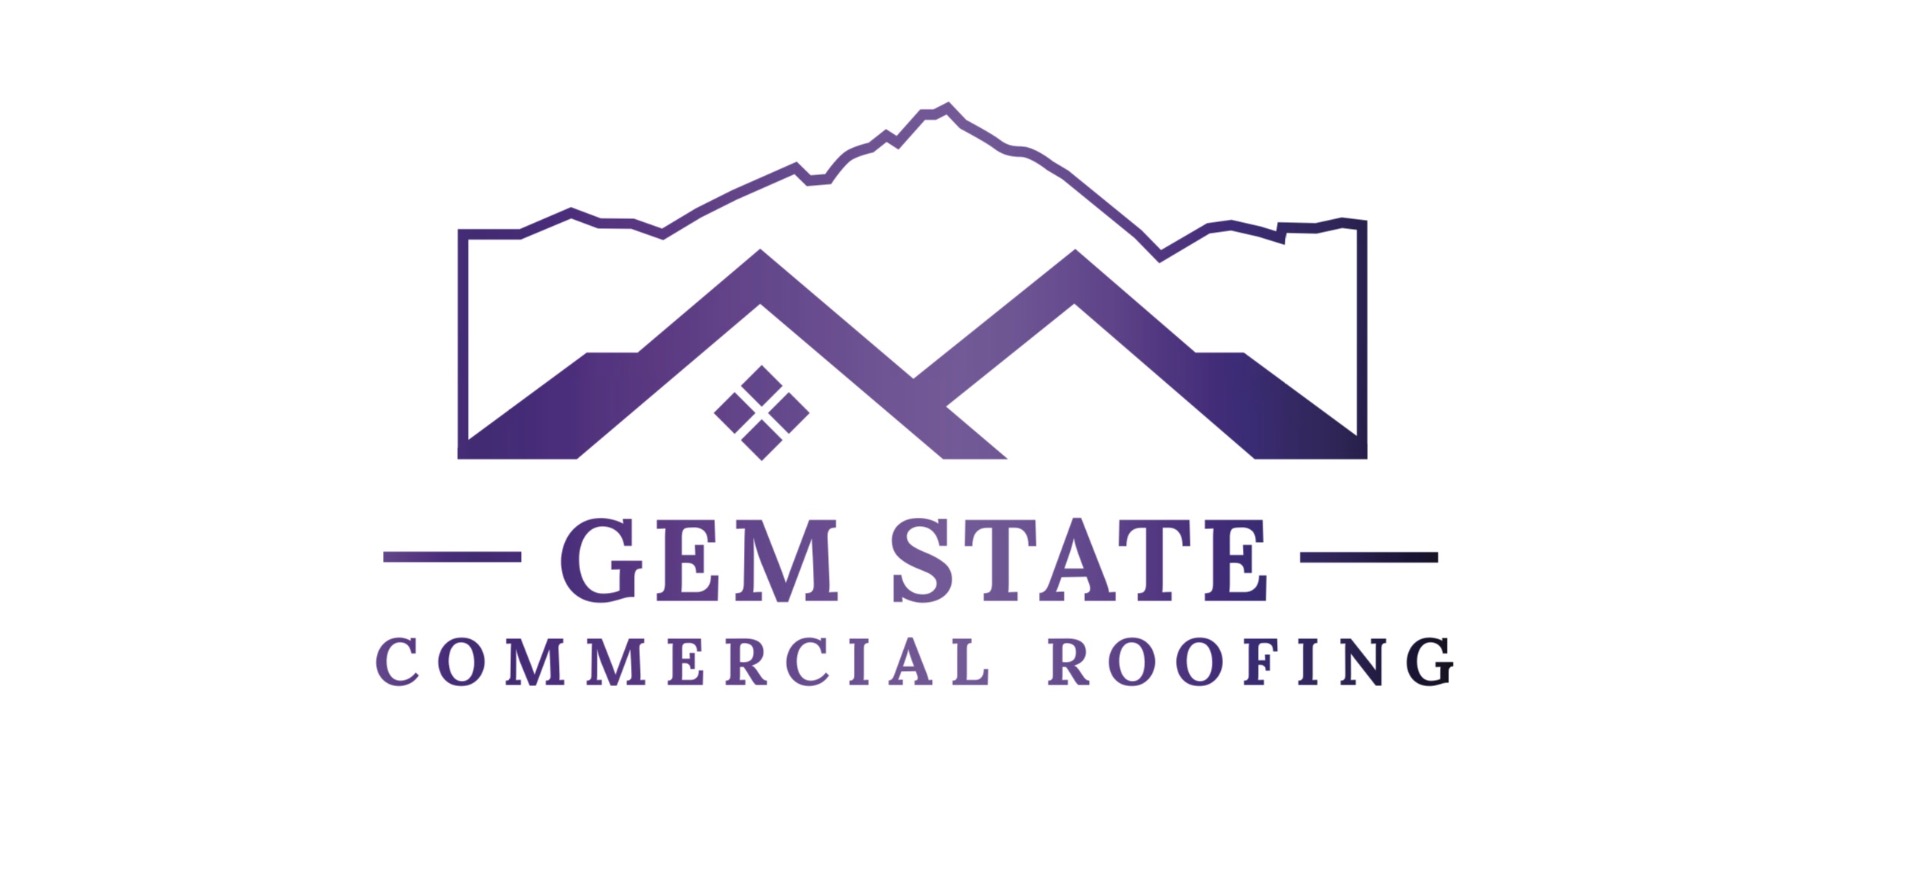 Gem State Commercial Roofing